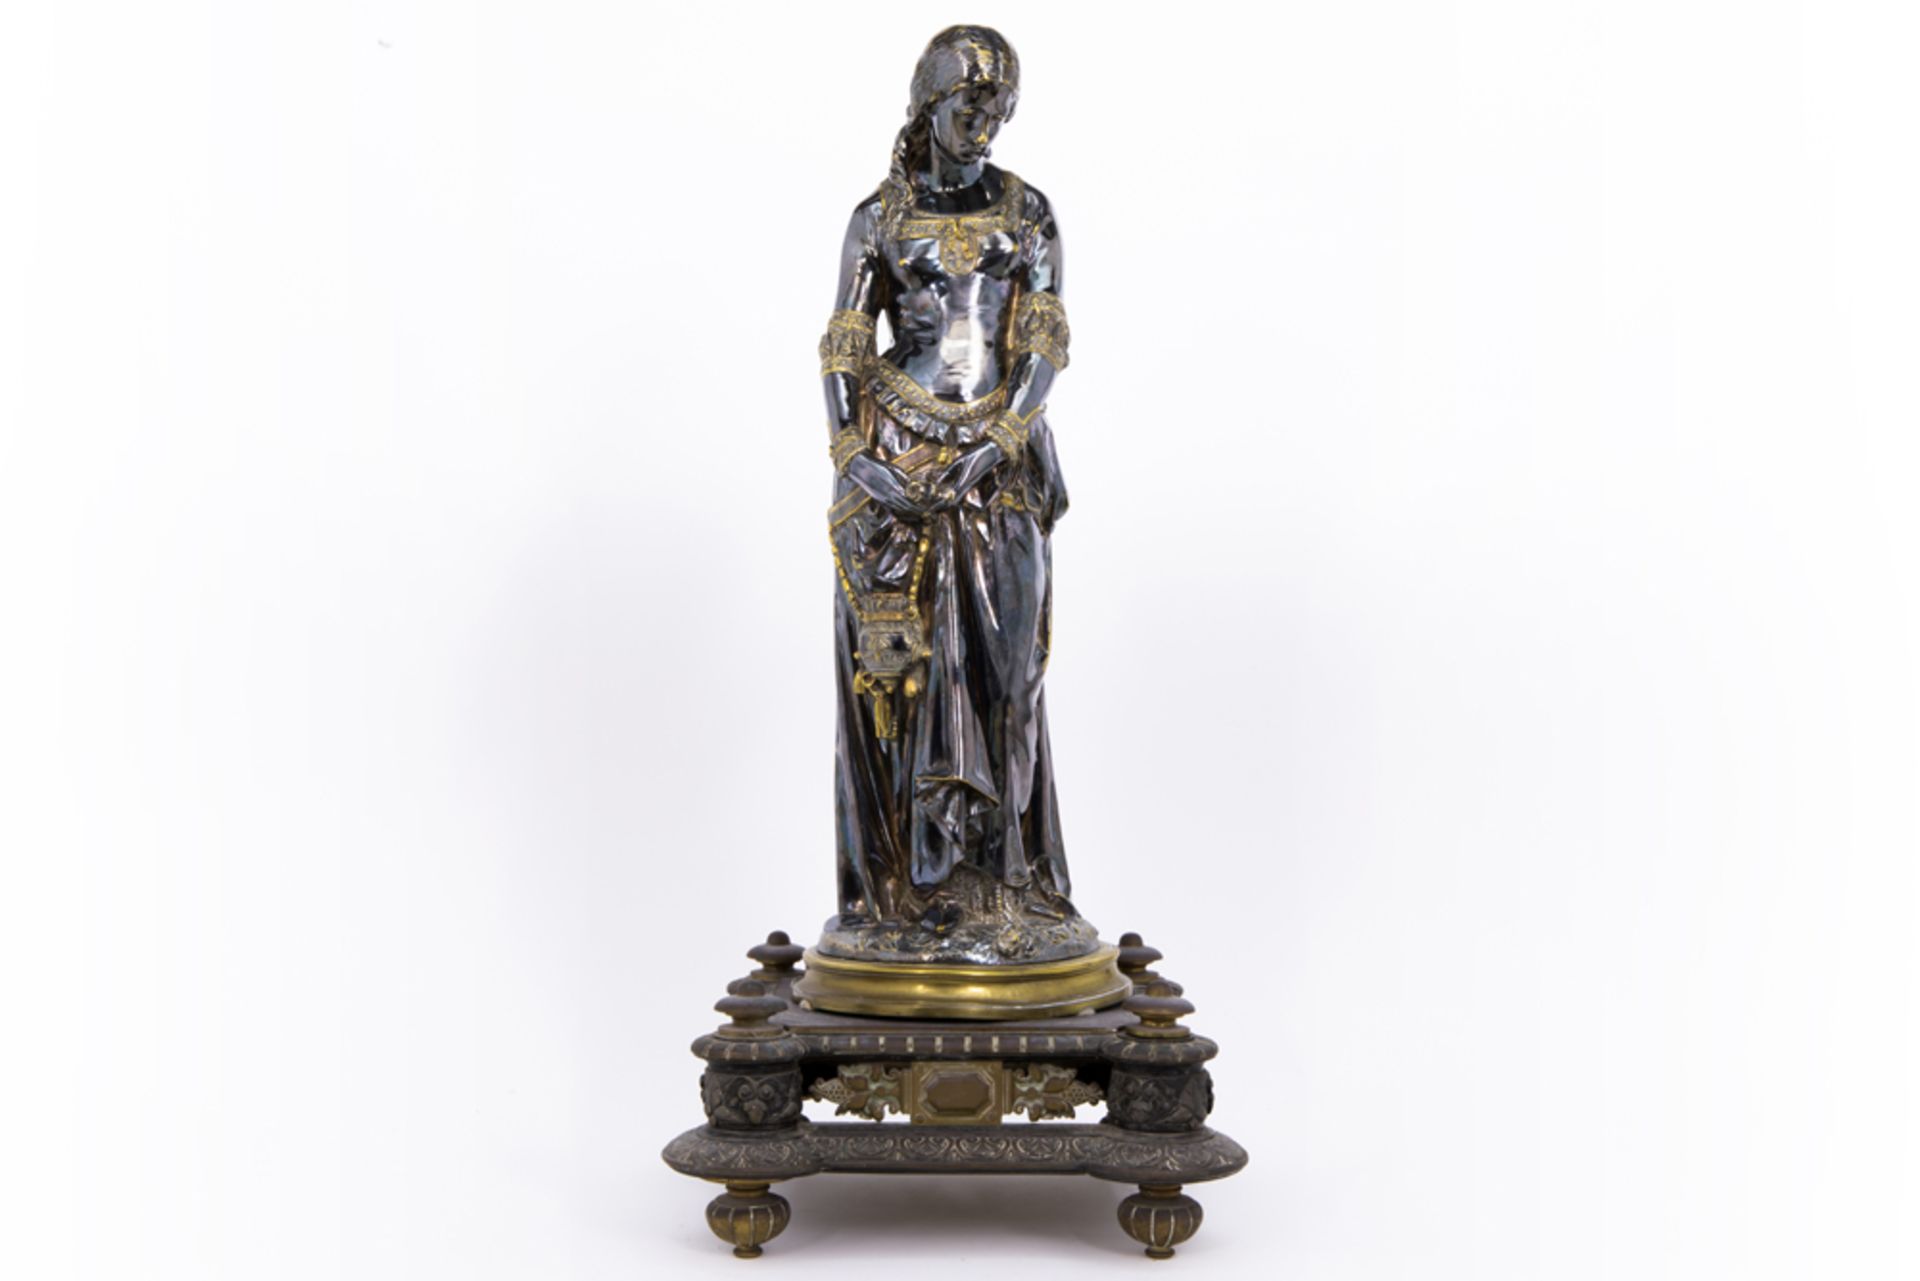 antique French "Noble Lady" sculpture in silverplated bronze - signed Emile André Boisseau - on a